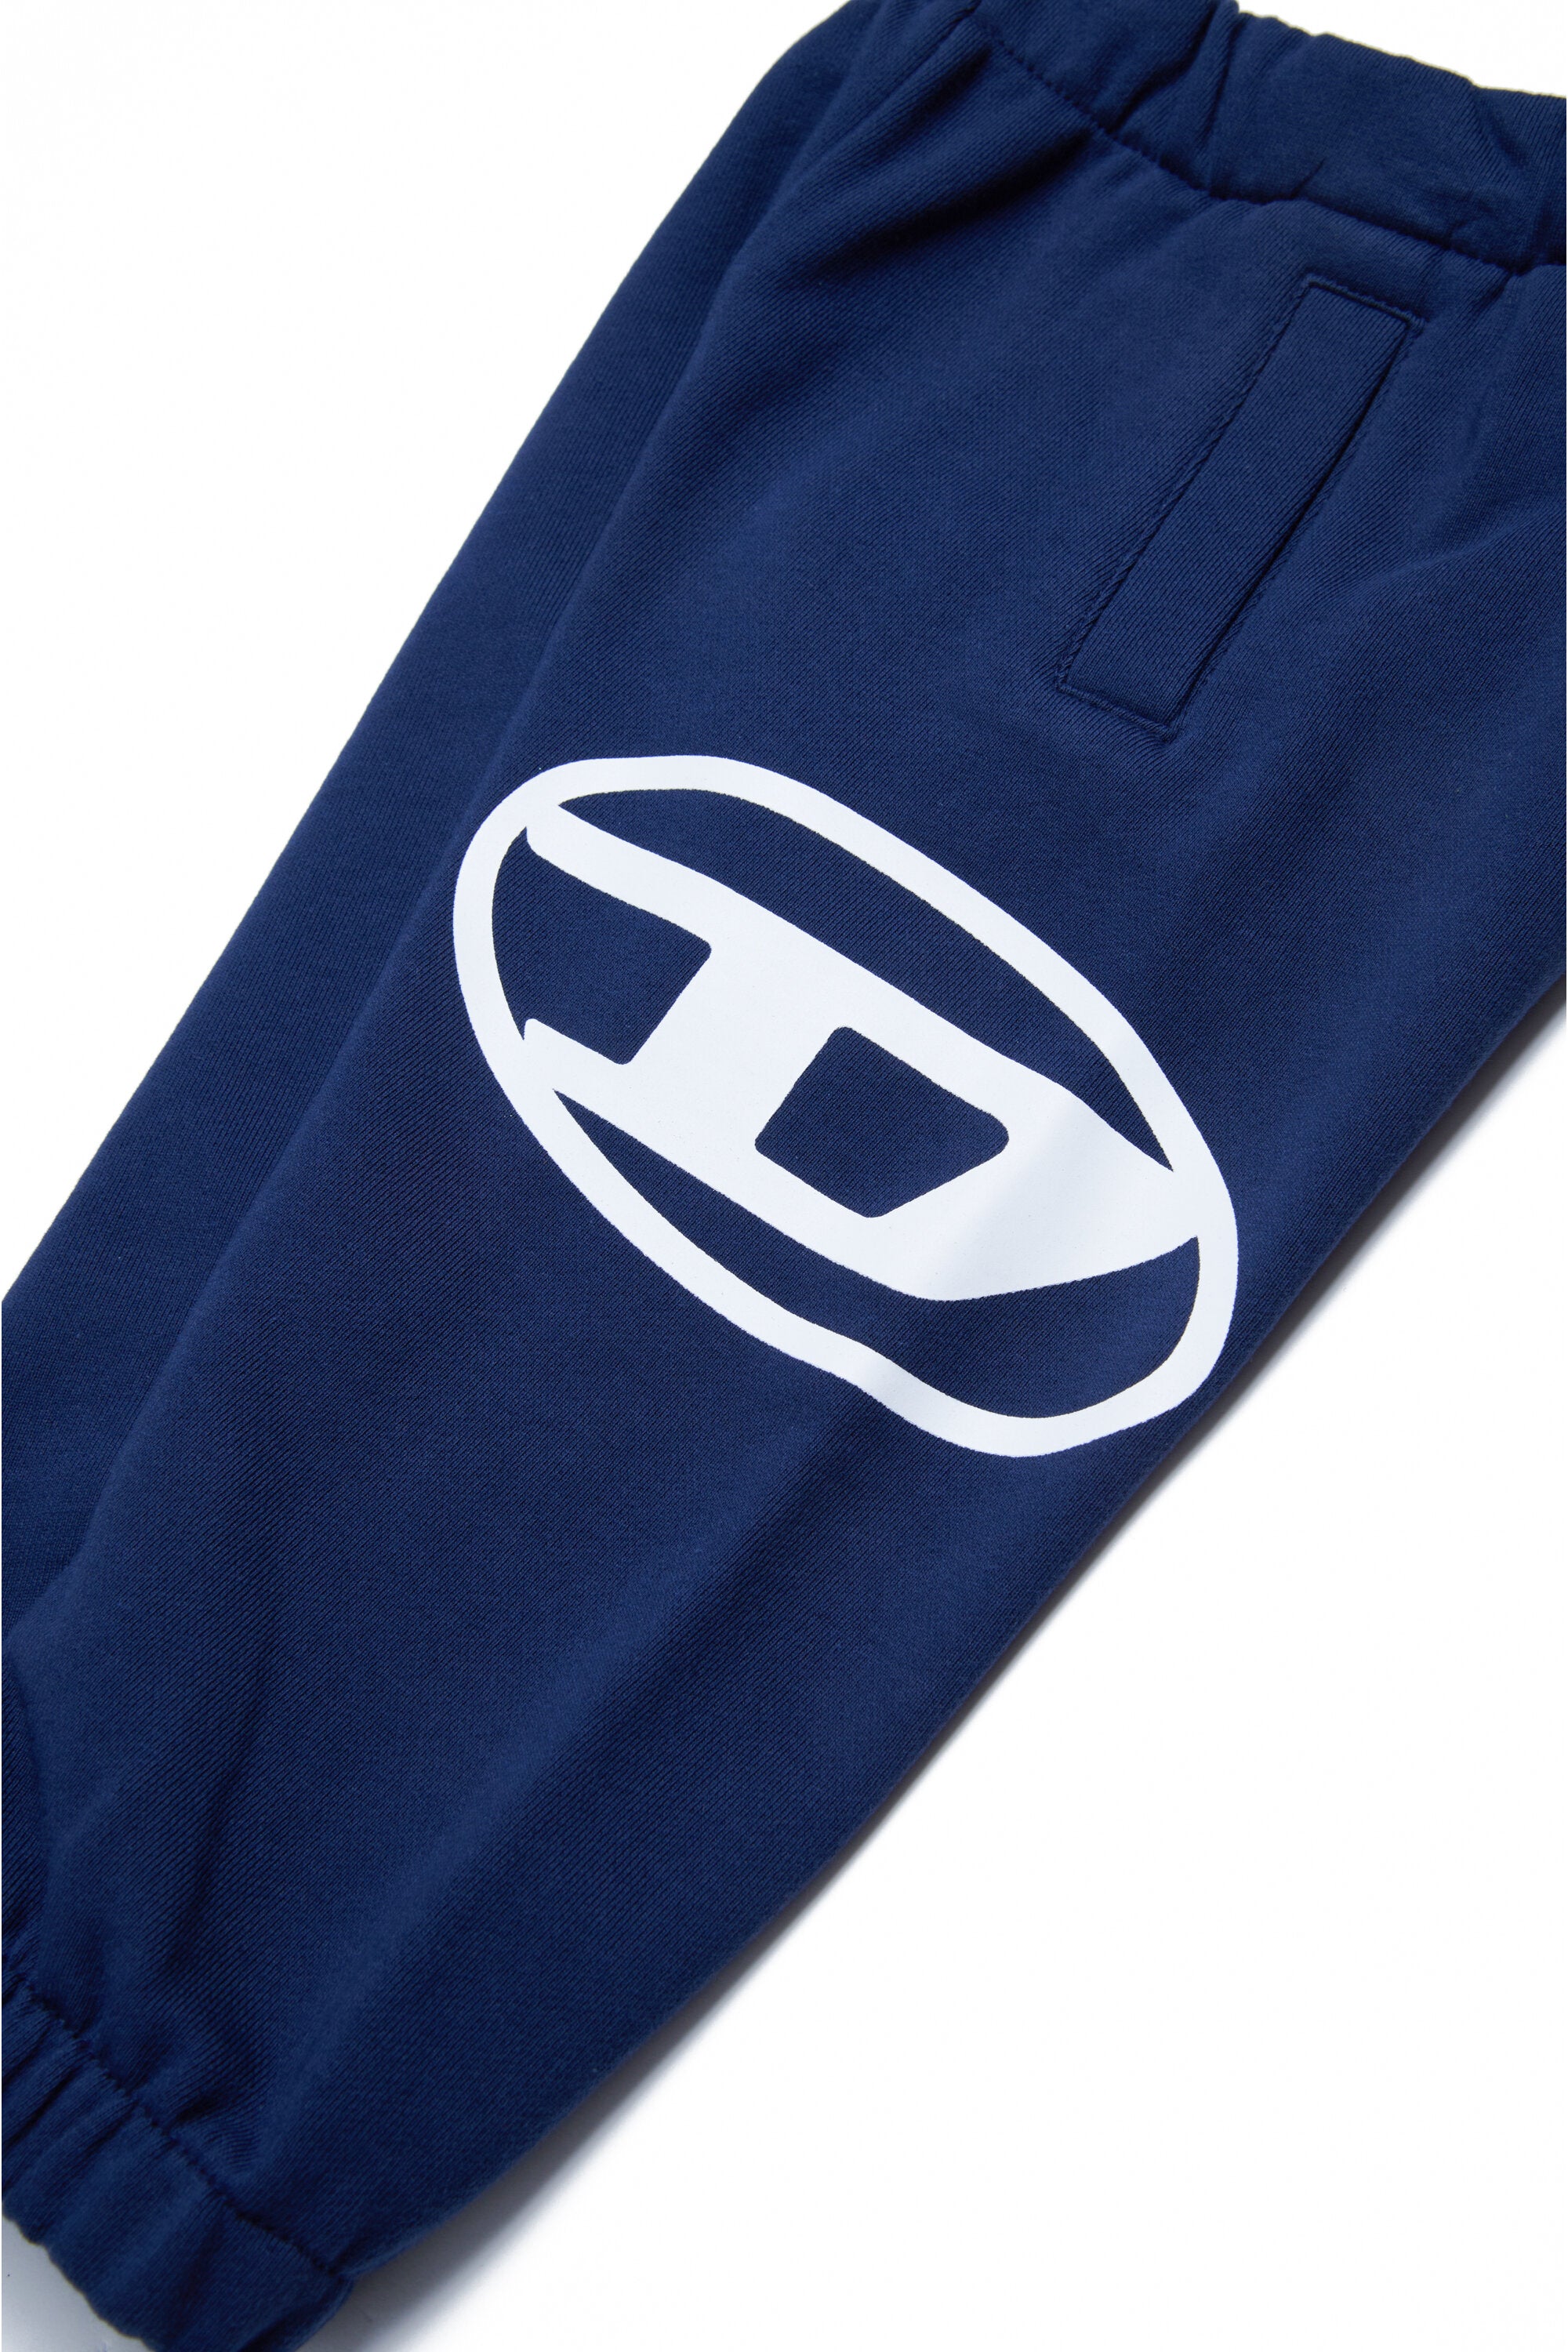 Fleece jogger trousers with oval D logo